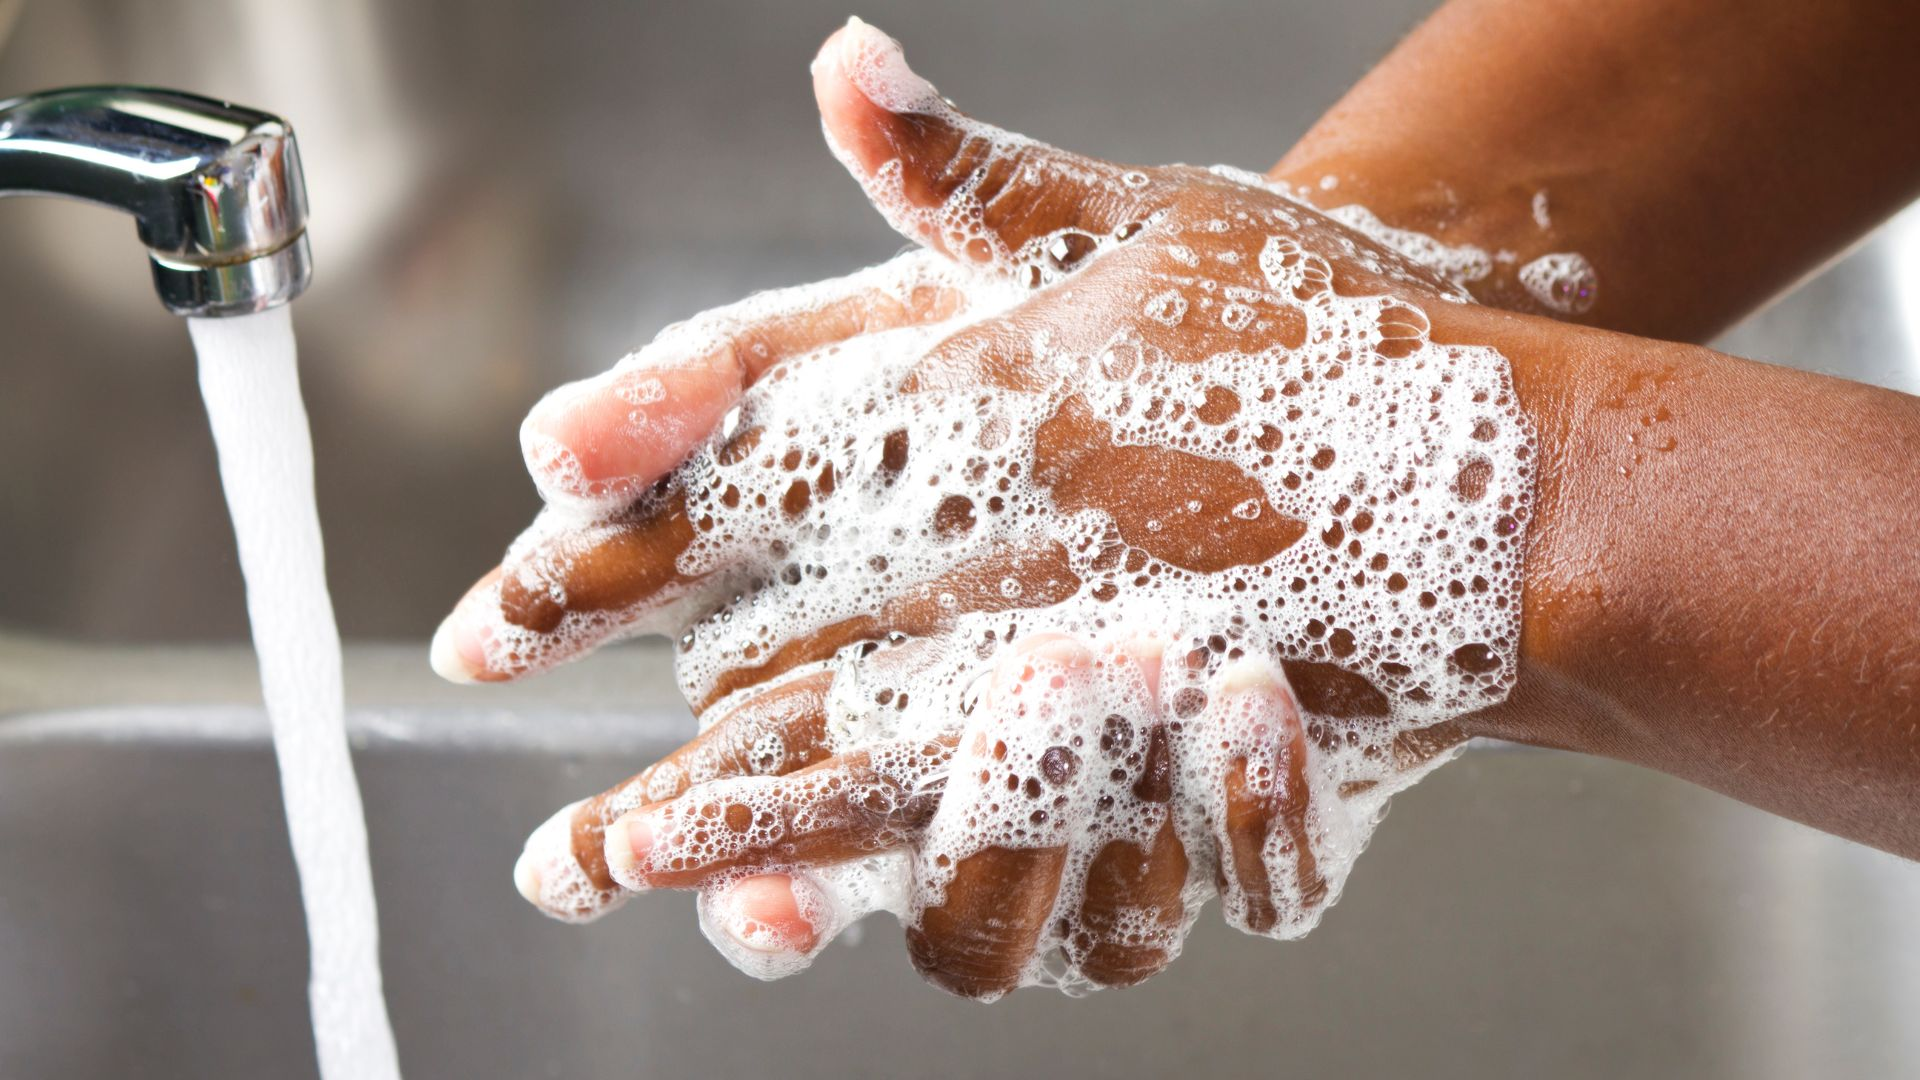 An image of a person washing their hands